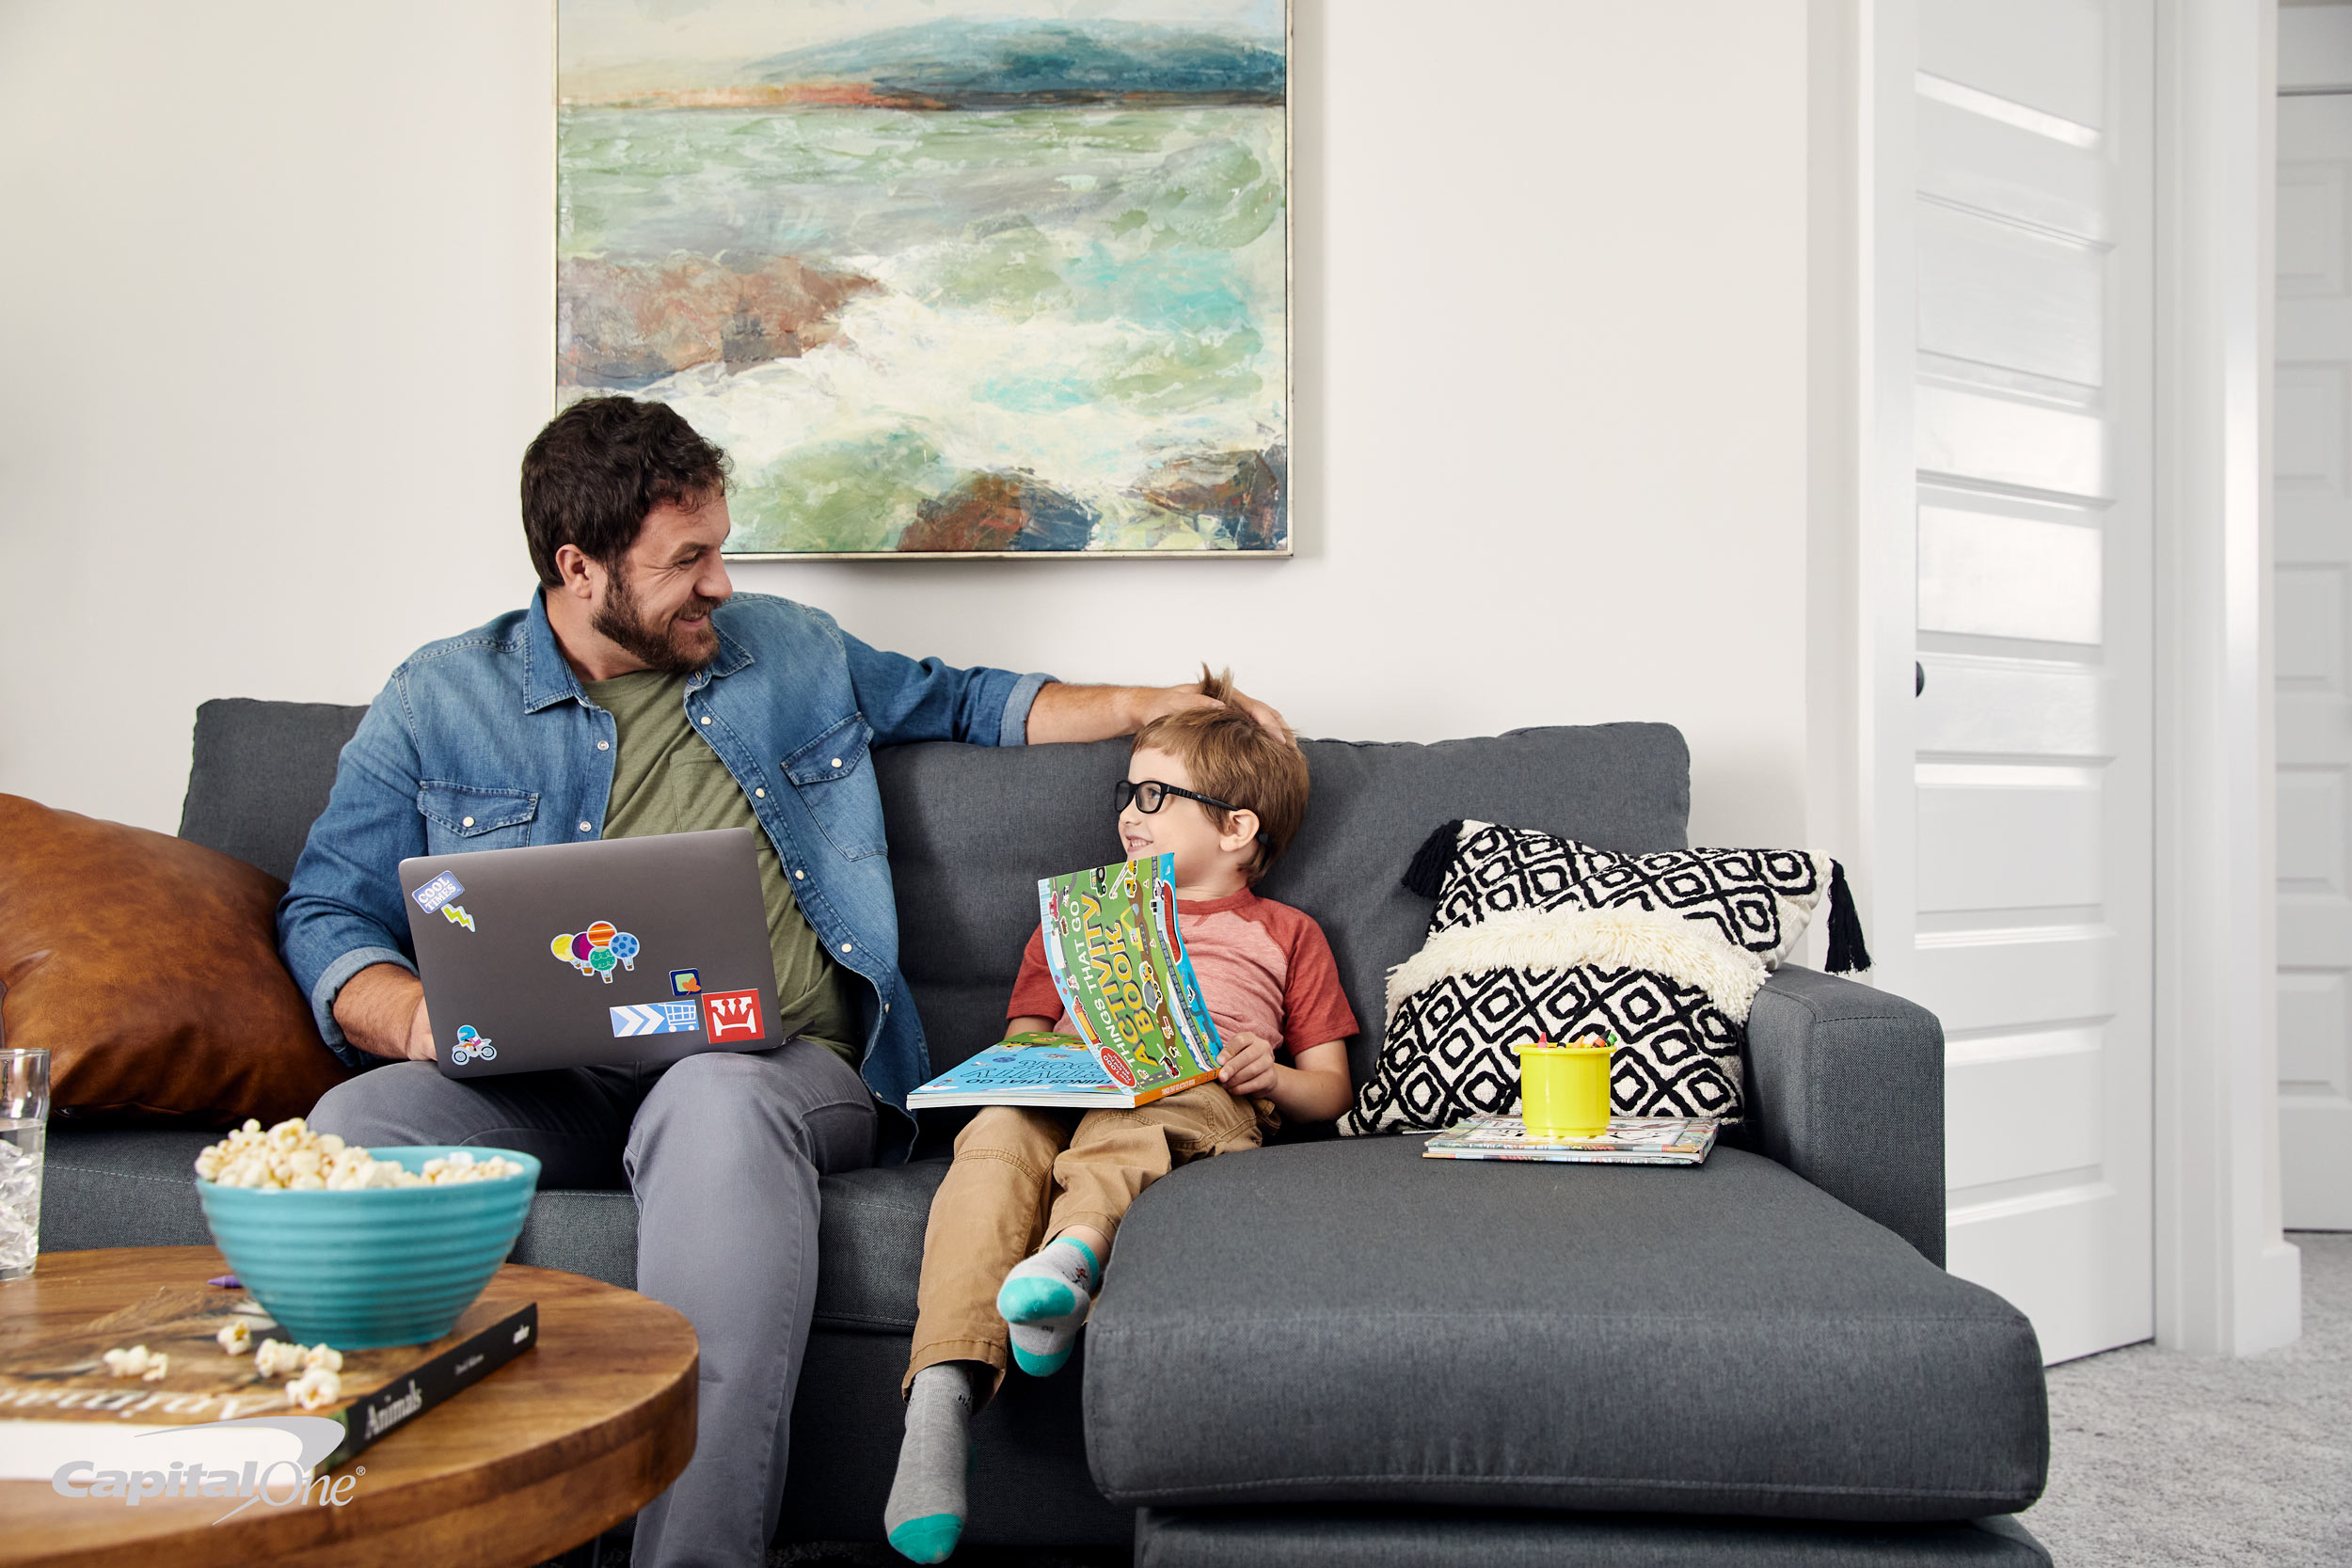 working-dad-with-son-dc-advertising-photography-eli-meir-kaplan